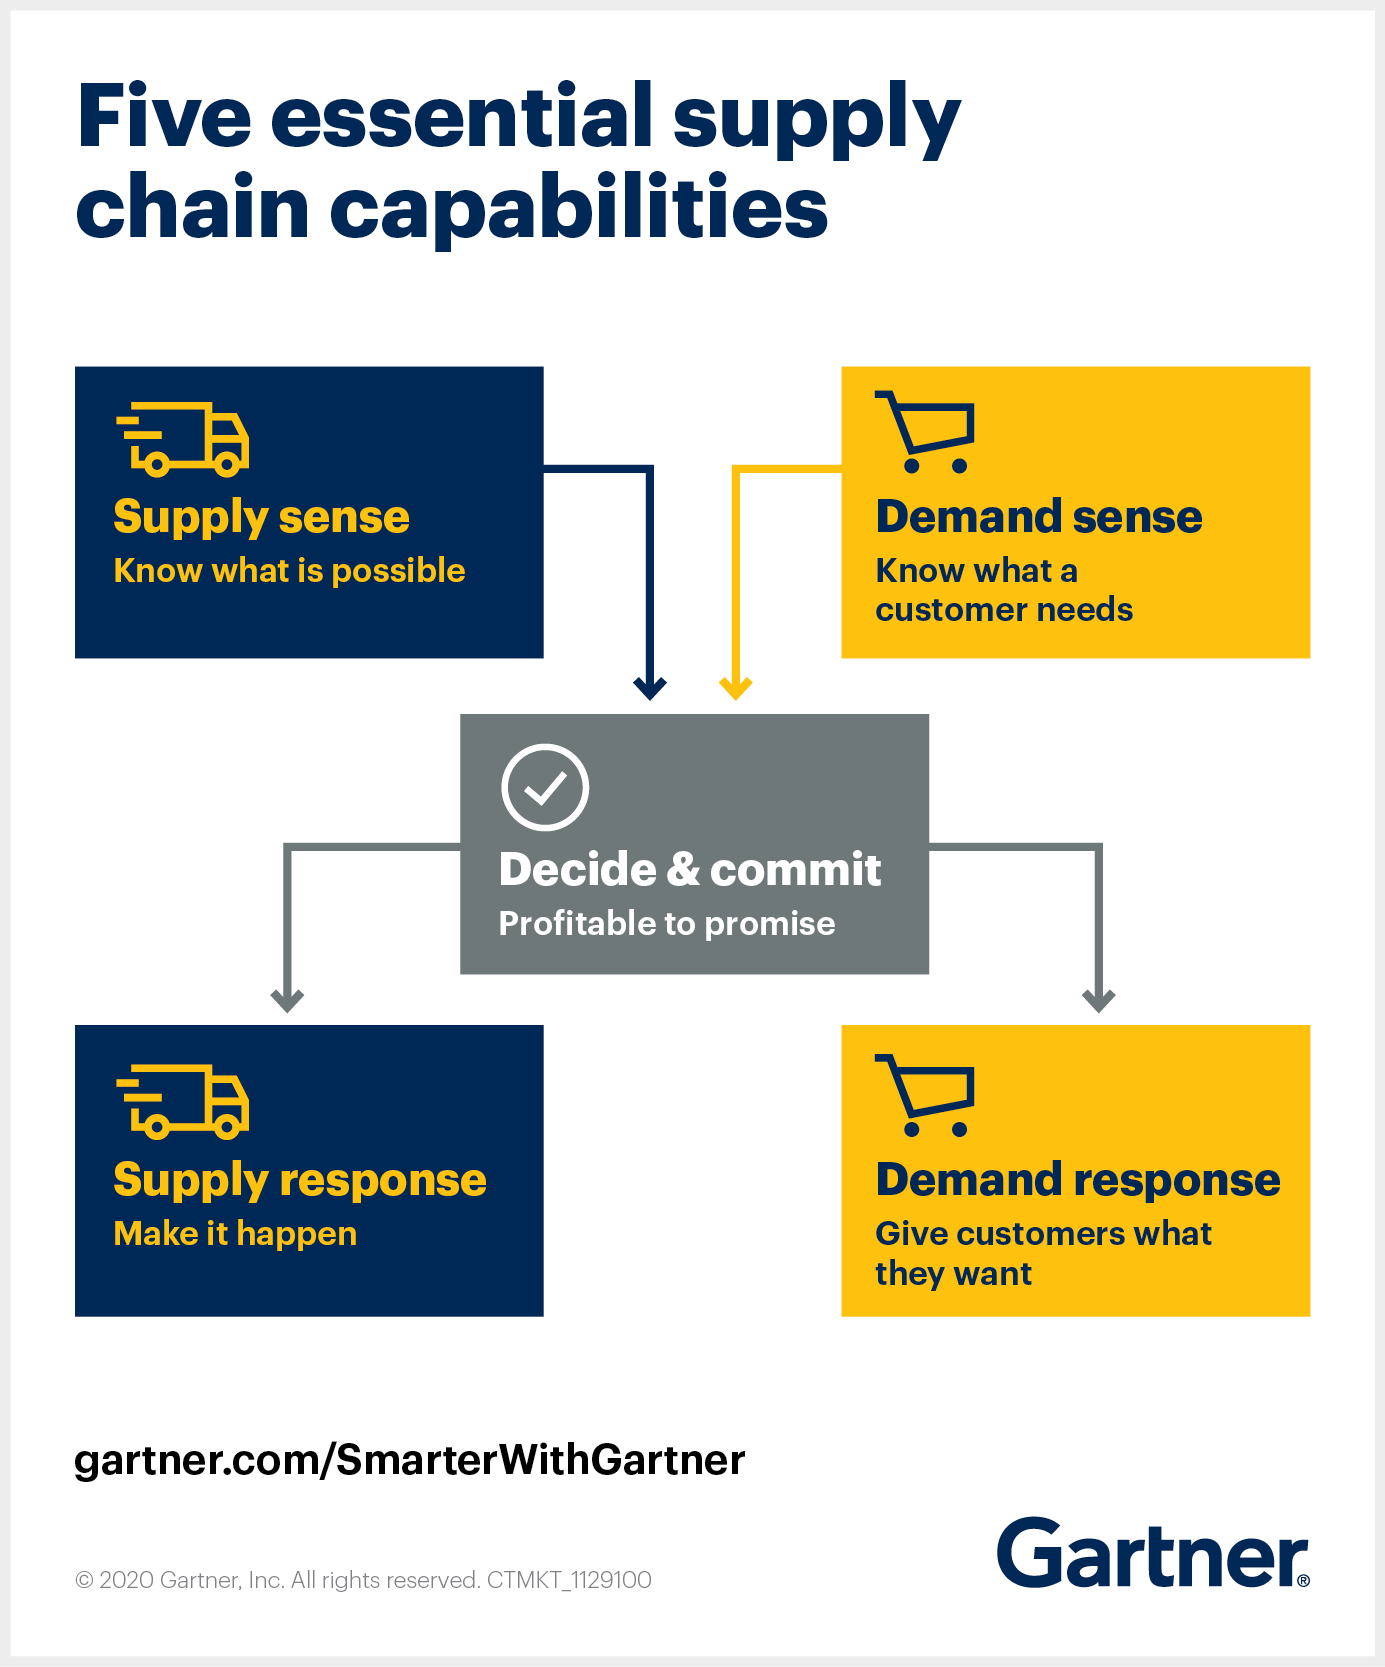 The Gartner Matrix for Supply Chain Strategy covers 5 essential capabilities for supply chain leaders to implement.